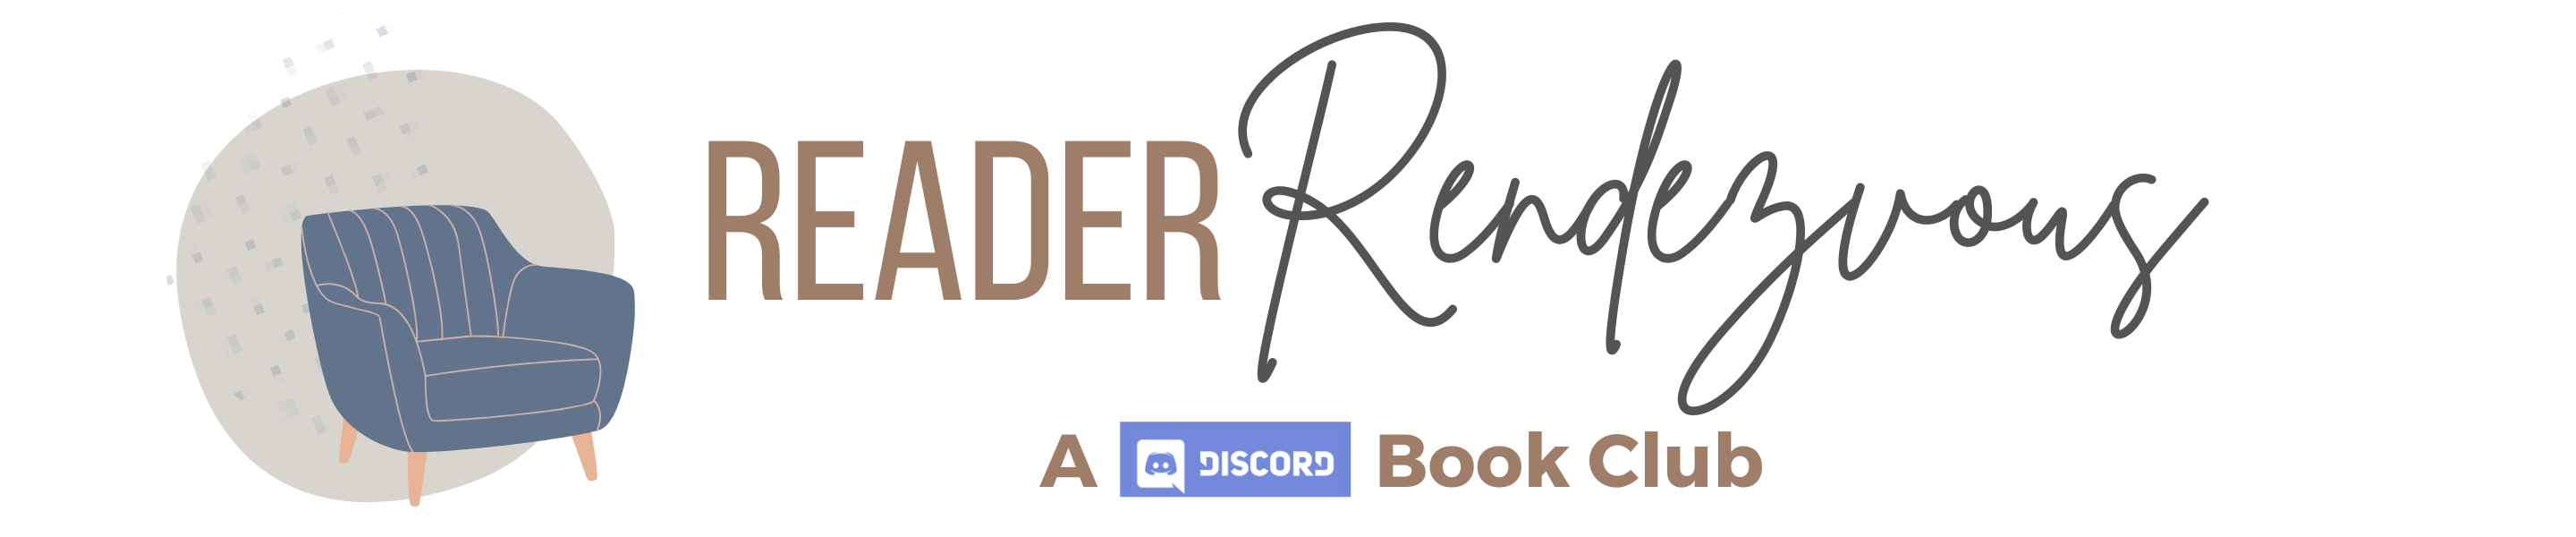 Reader Rendezvous: A Discord Book Club